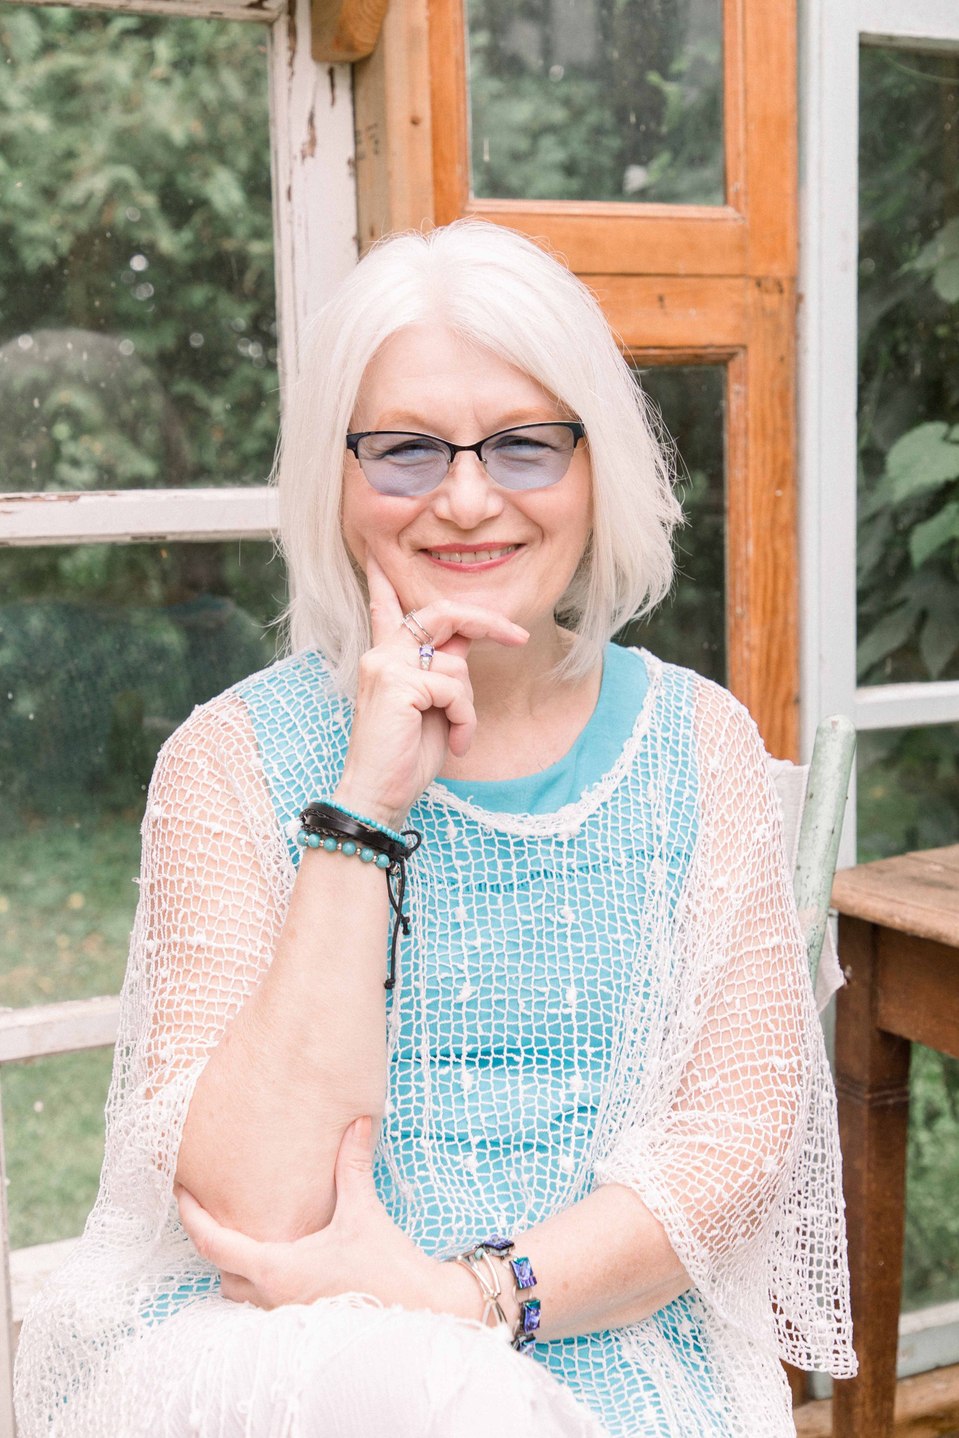 Portrait of older woman with glasses sitting in a greenhouse, Niagara family photographer, family photography, Niagara portrait photographer, portrait photography, Emily VanderBeek Photography.